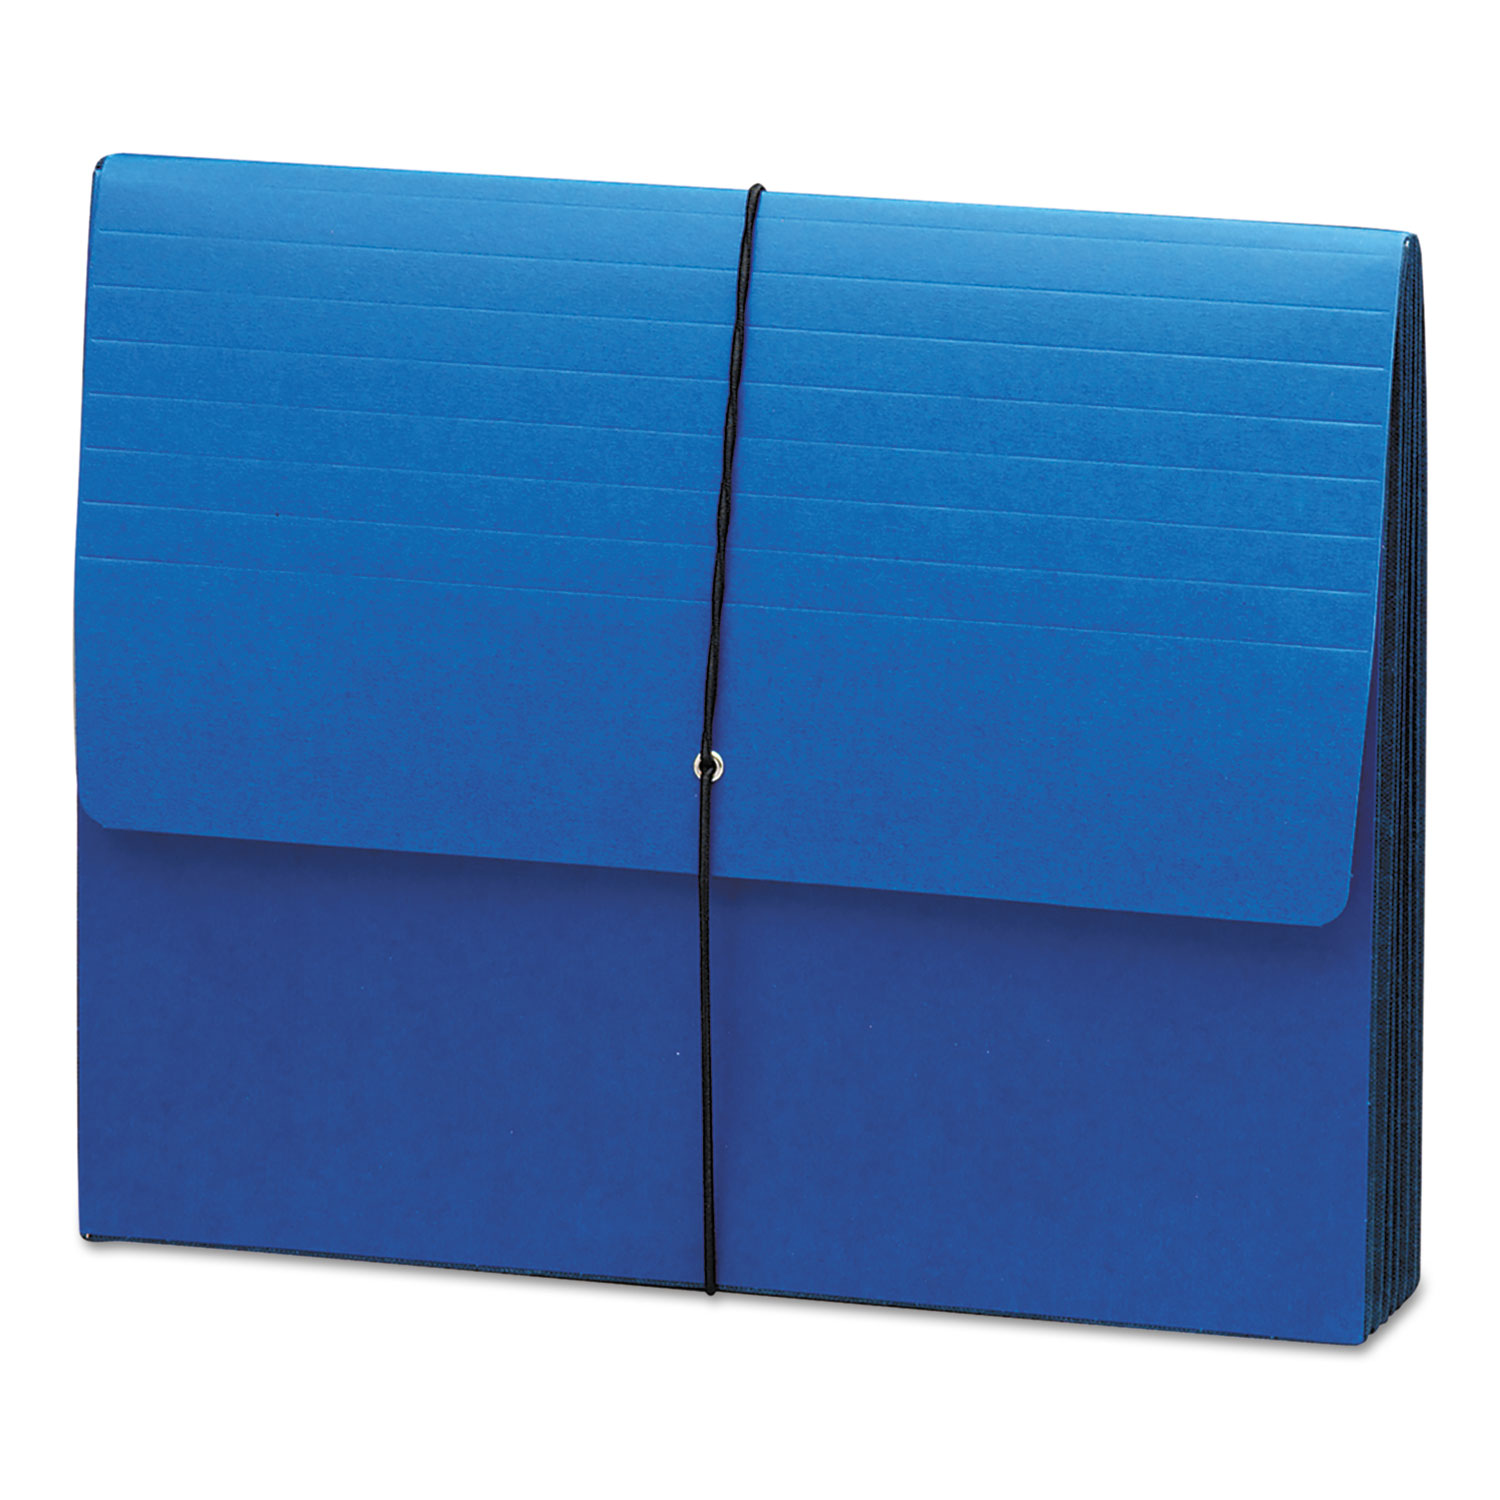  Smead 71122 Extra-Wide Expanding Wallets w/ Elastic Cord, 5.25 Expansion, 1 Section, Letter Size, Navy Blue (SMD71122) 